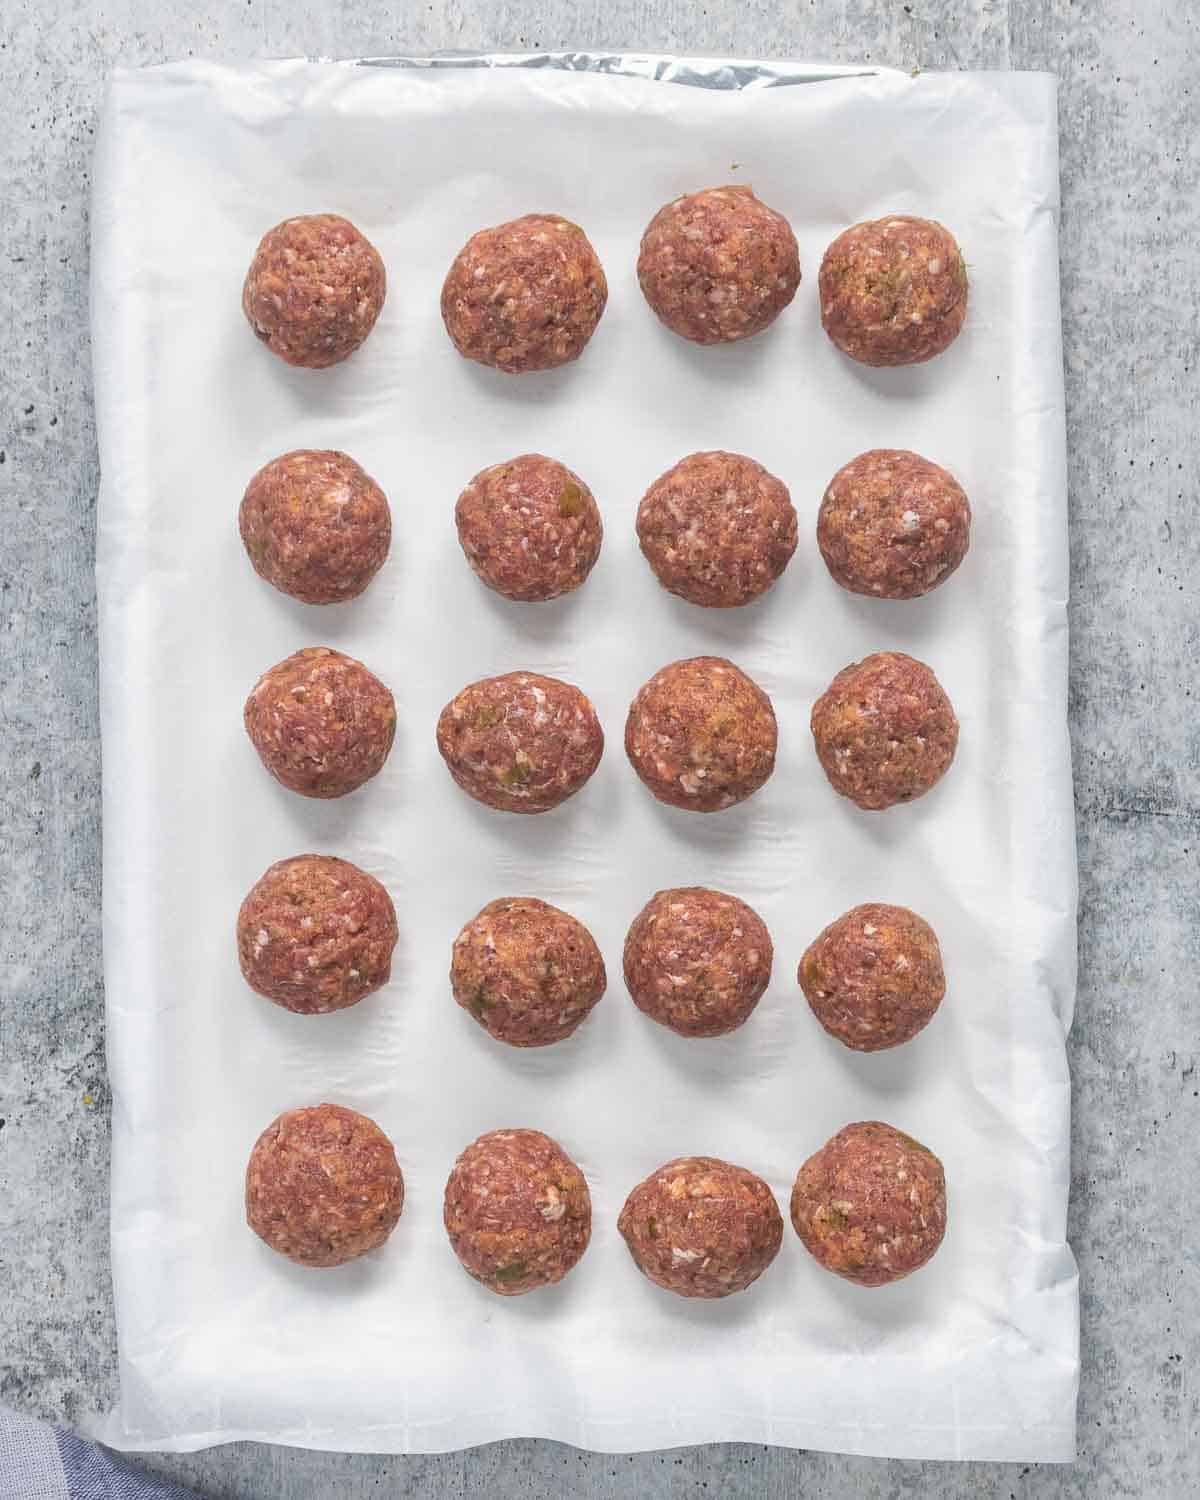 Twenty raw beef meatballs on a lined parchment paper baking sheet.